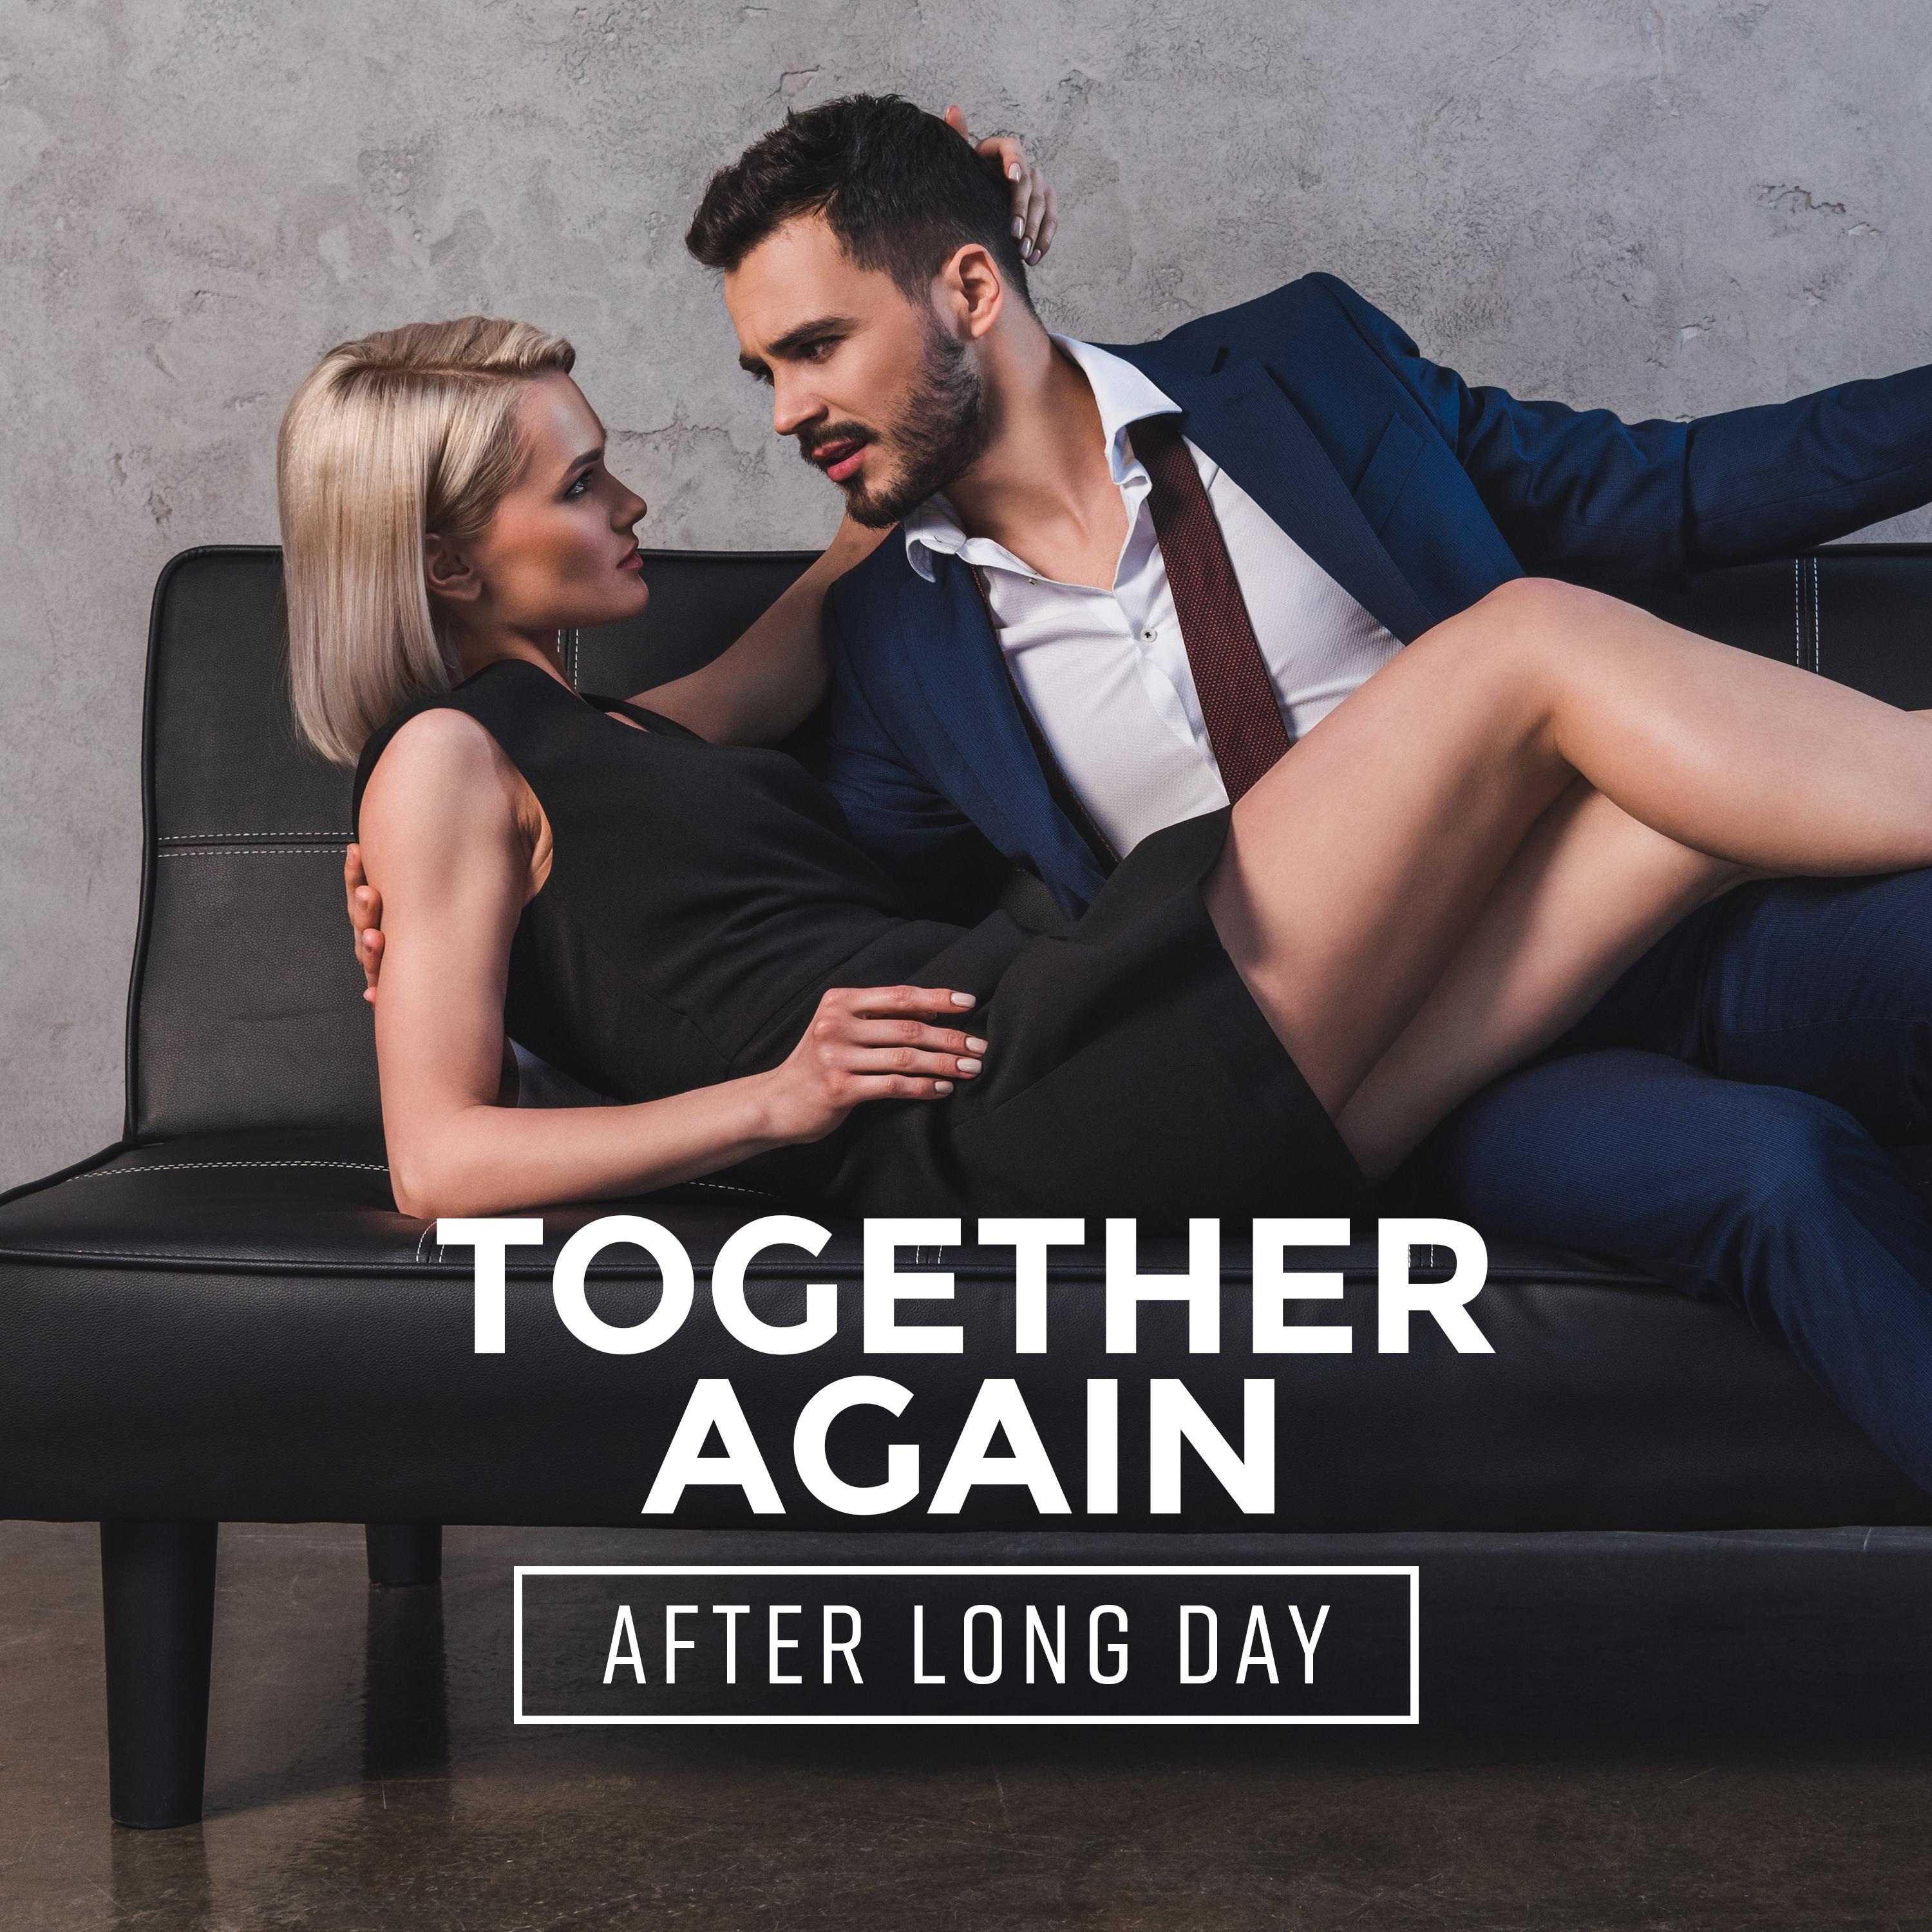 Together Again After Long Day: 2019 Smooth Jazz Relaxing Music Compilation for Couples, Nice Time Spending with Love, Velvet Melodies